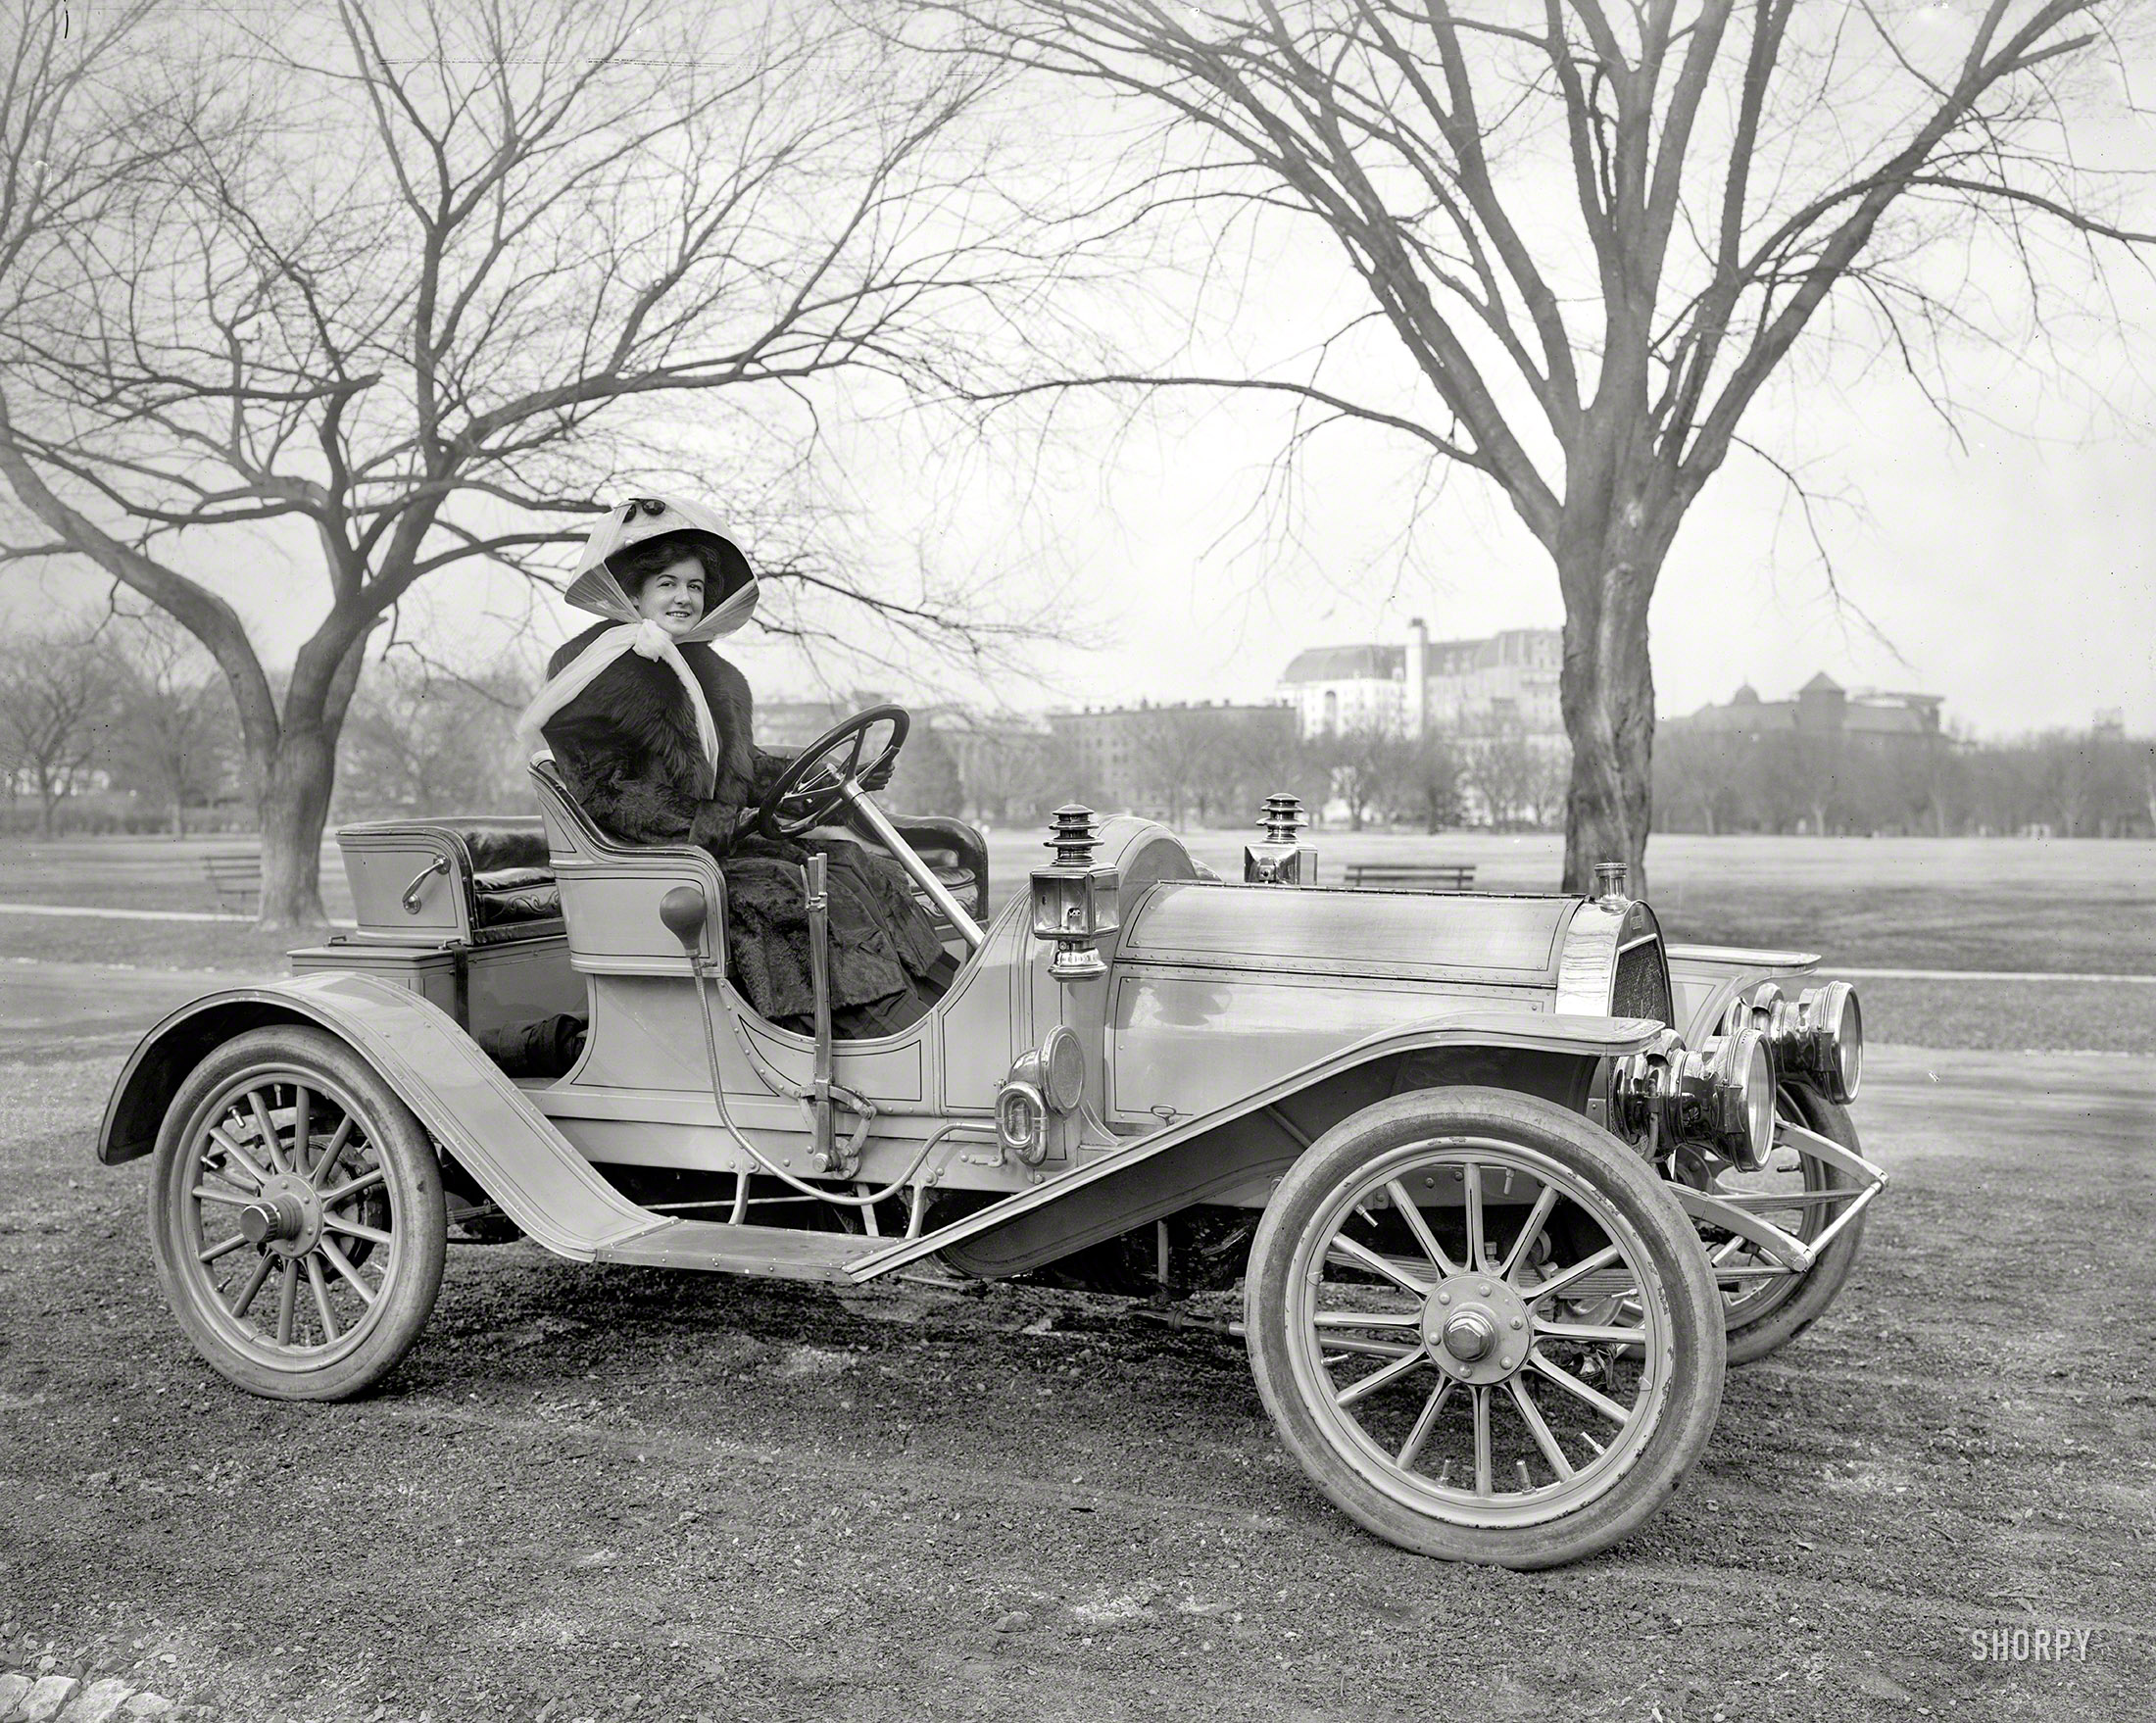 Washington, D.C., circa 1908. "Maycliffe, R., Miss." The Broadway ingenue Ruth Maycliffe. Harris & Ewing Collection glass negative. View full size.